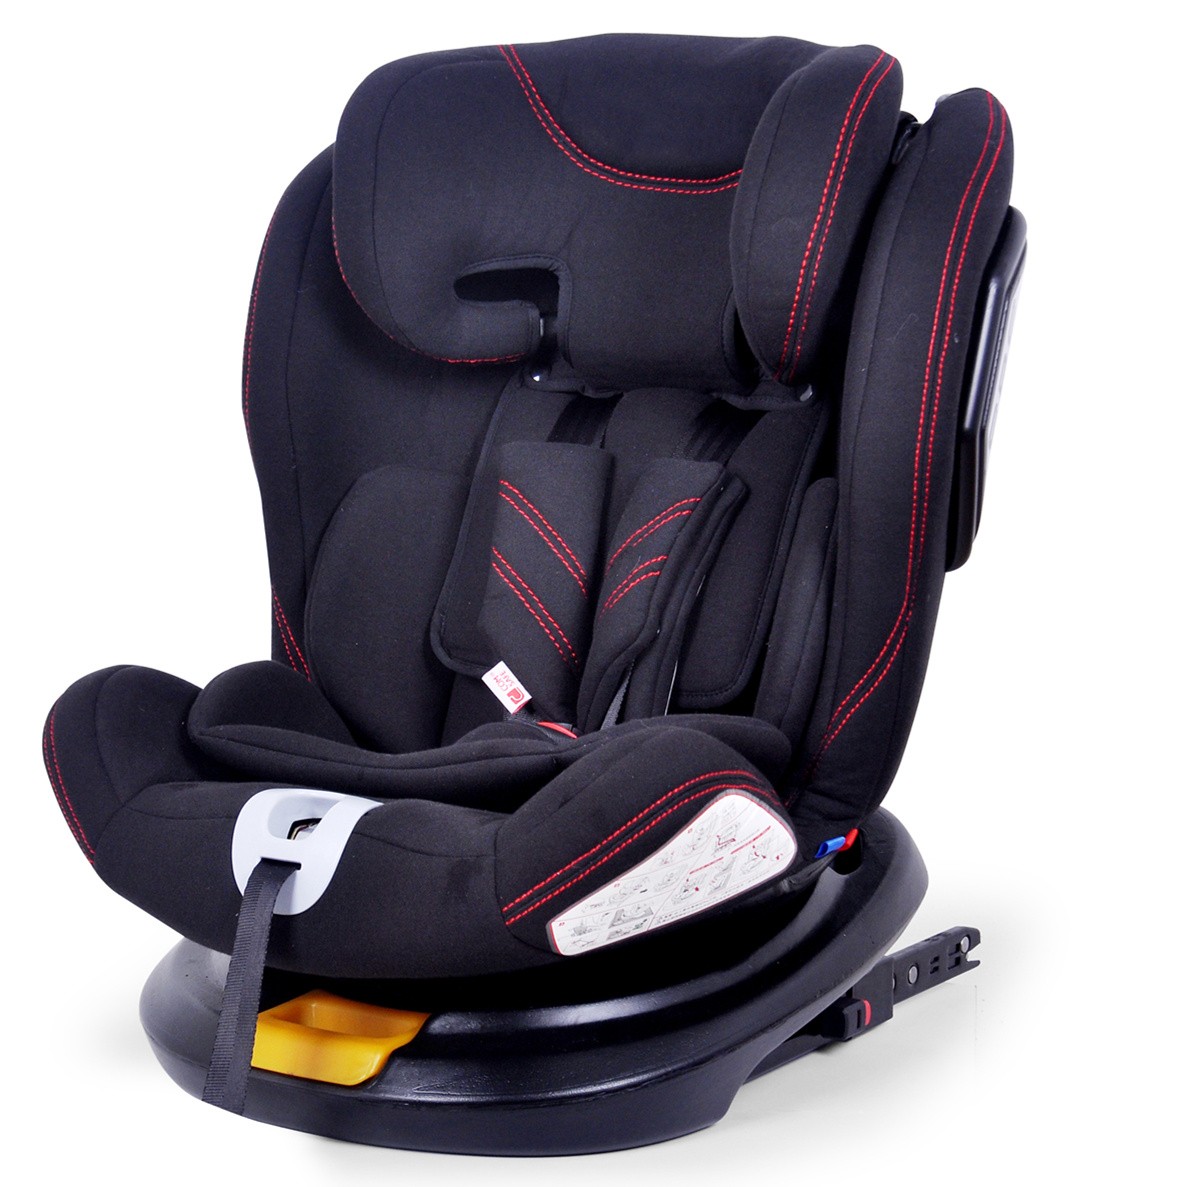 All-in-One 360 Rotating ECE R44 Baby Car Seat